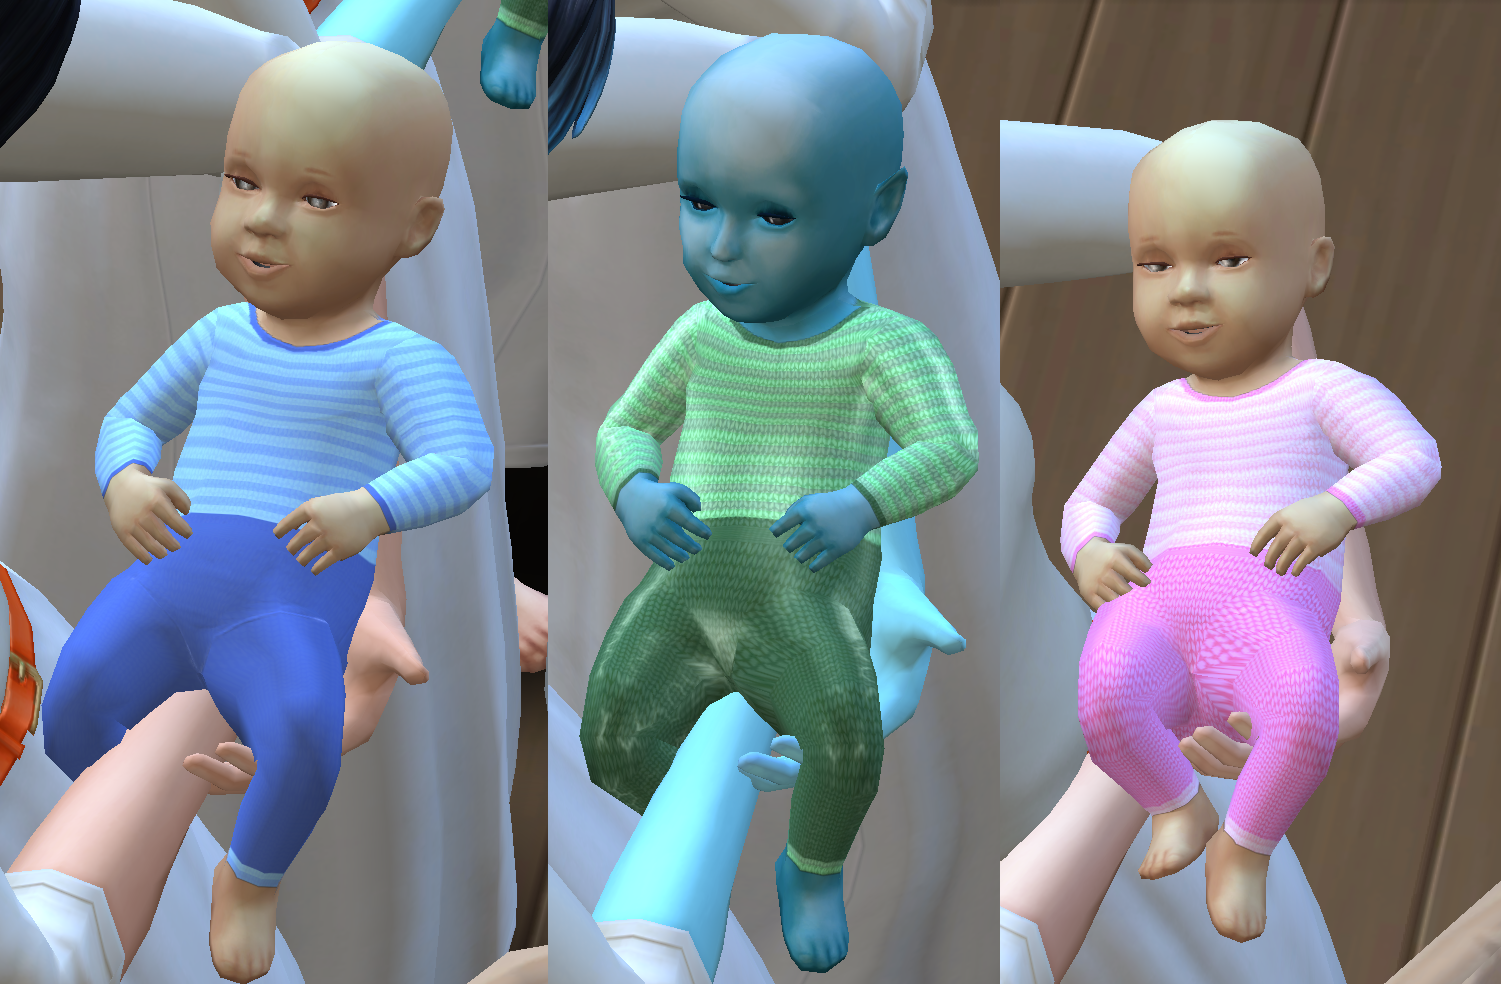 Stripy baby outfit - Screenshots - The Sims 4 Mods - CurseForge